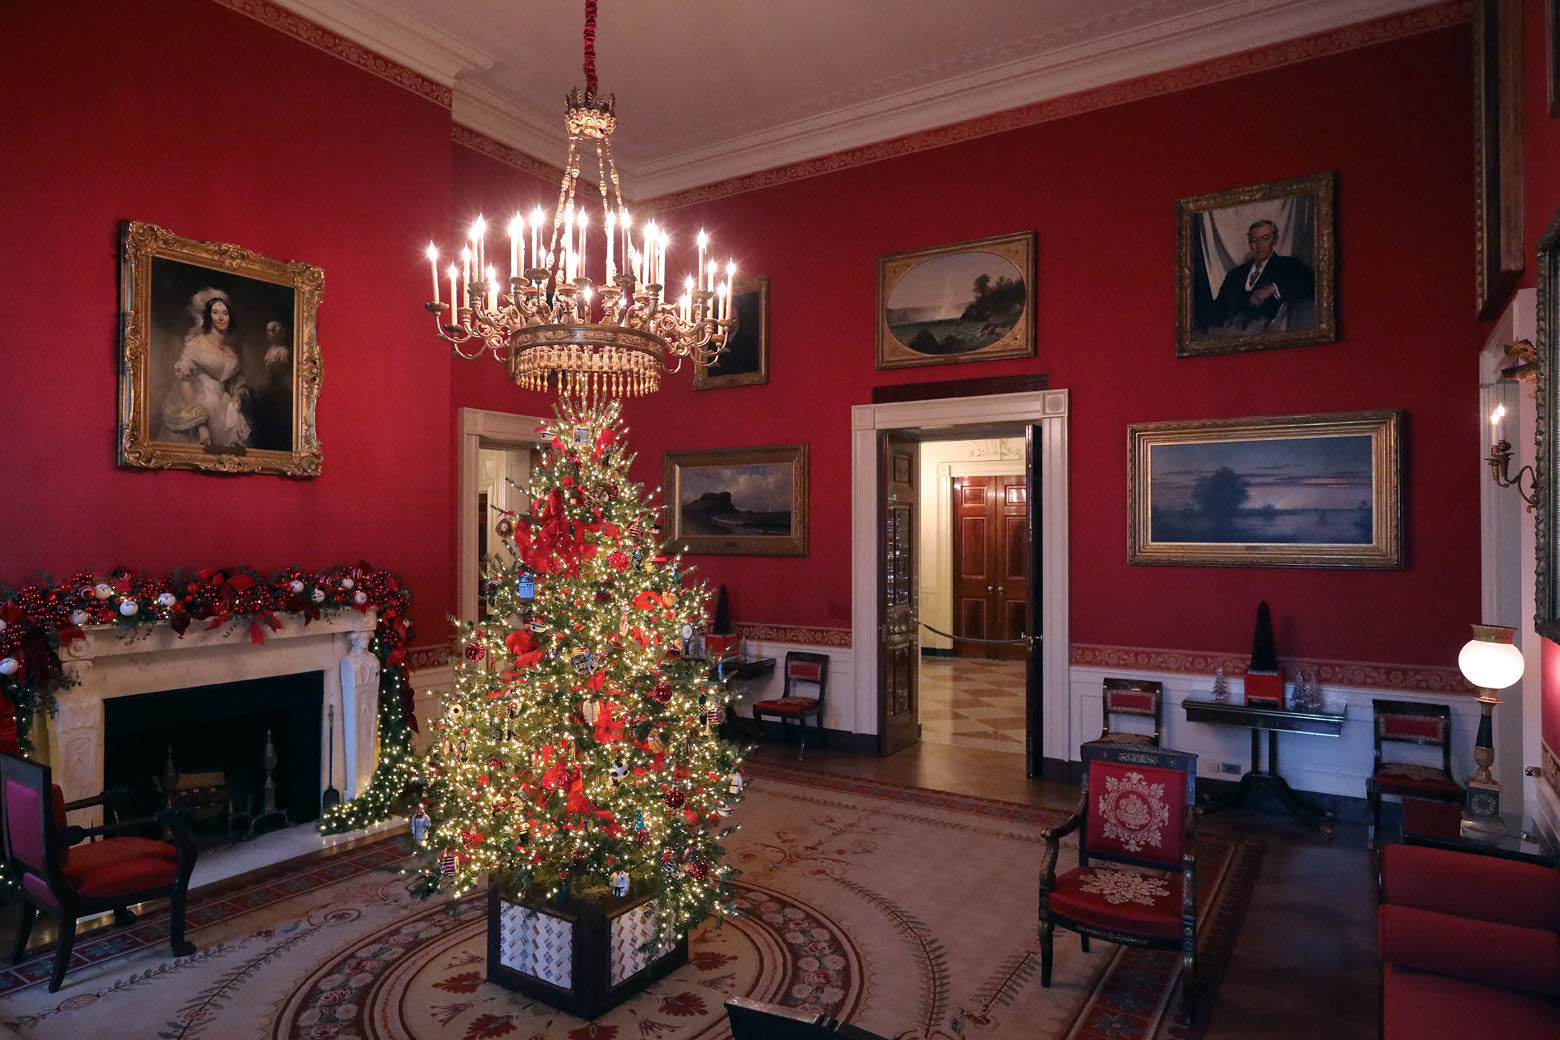 WASHINGTON, DC - NOVEMBER 26: Carrying first lady Melania Trump's 'Be Best' initiative, the Red Room is decorated to 'celebrate children through the dÃ©cor, which displays ways in which children can excel in their own path' at the White House November 26, 2018 in Washington, DC. The 2018 theme of the White House holiday decorations is 'American Treasures,' and features patriotic displays highlighting the country's 'unique heritage.' The White House expects to host 100 open houses and more than 30,000 guests who will tour the topiary trees, architectural models of major U.S. cities, the Gold Star family tree and national monuments in gingerbread. (Photo by Chip Somodevilla/Getty Images)